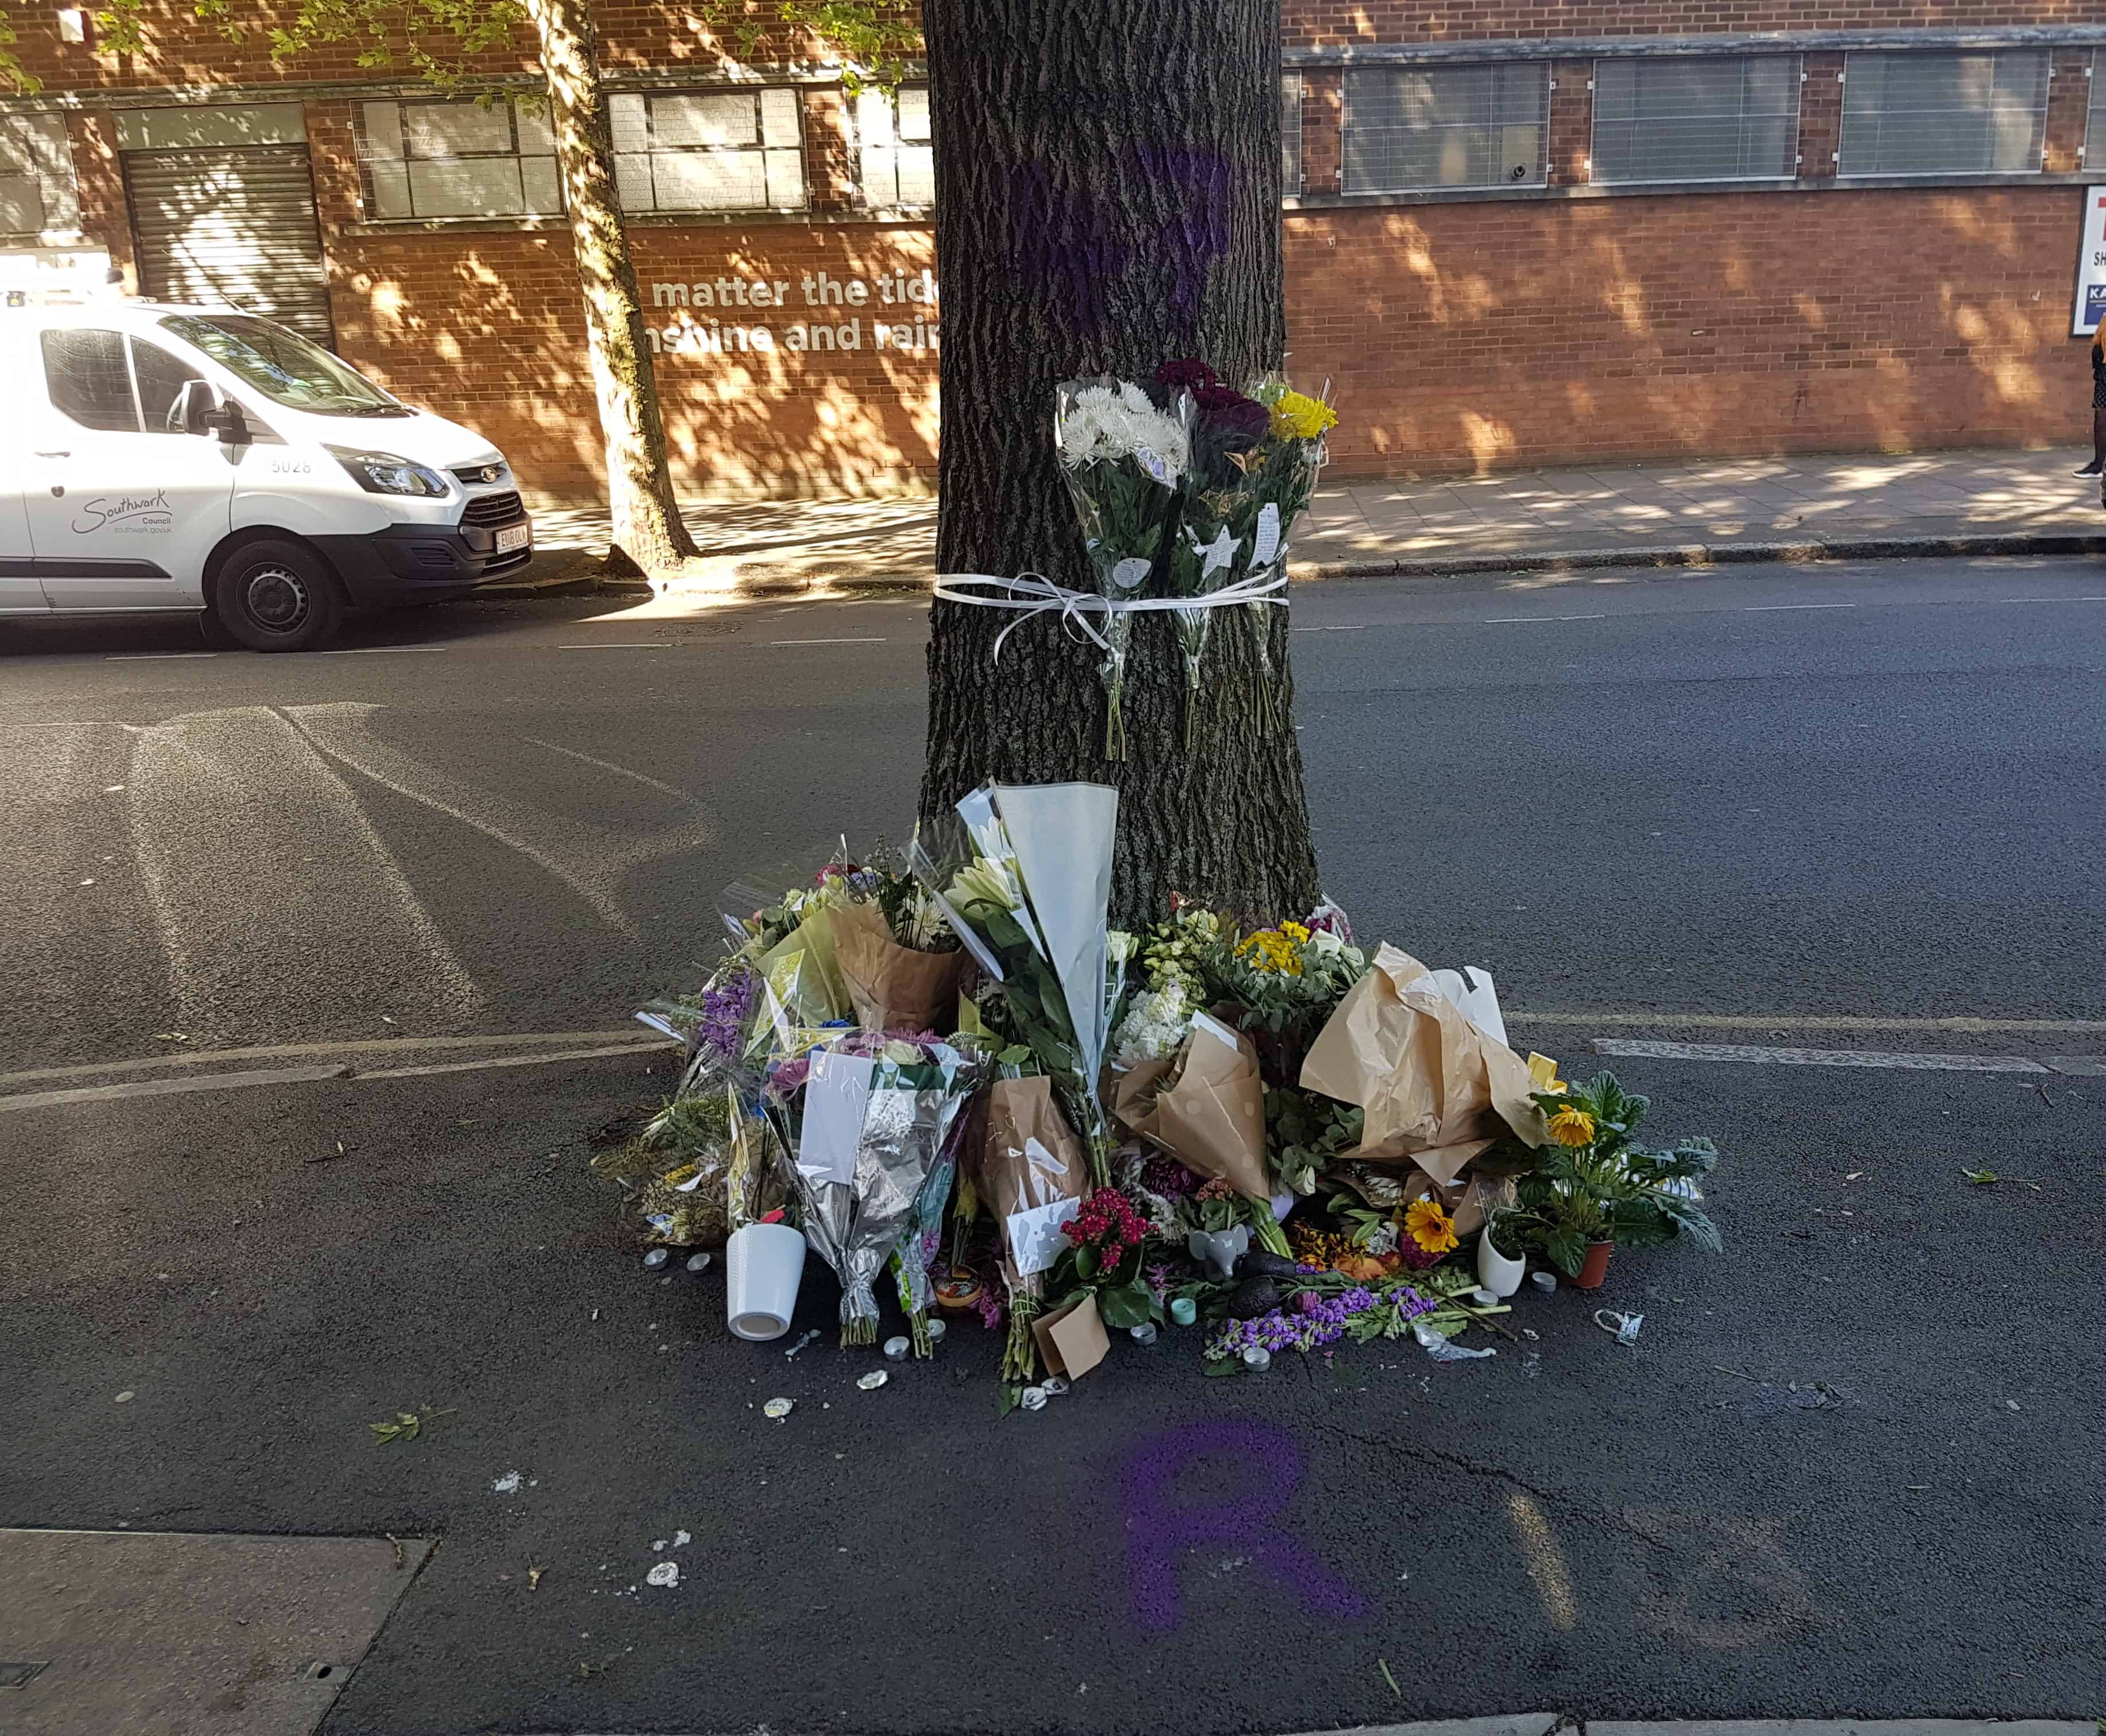 Flowers, cards and candles have been left at the scene where the man was found on Friday morning